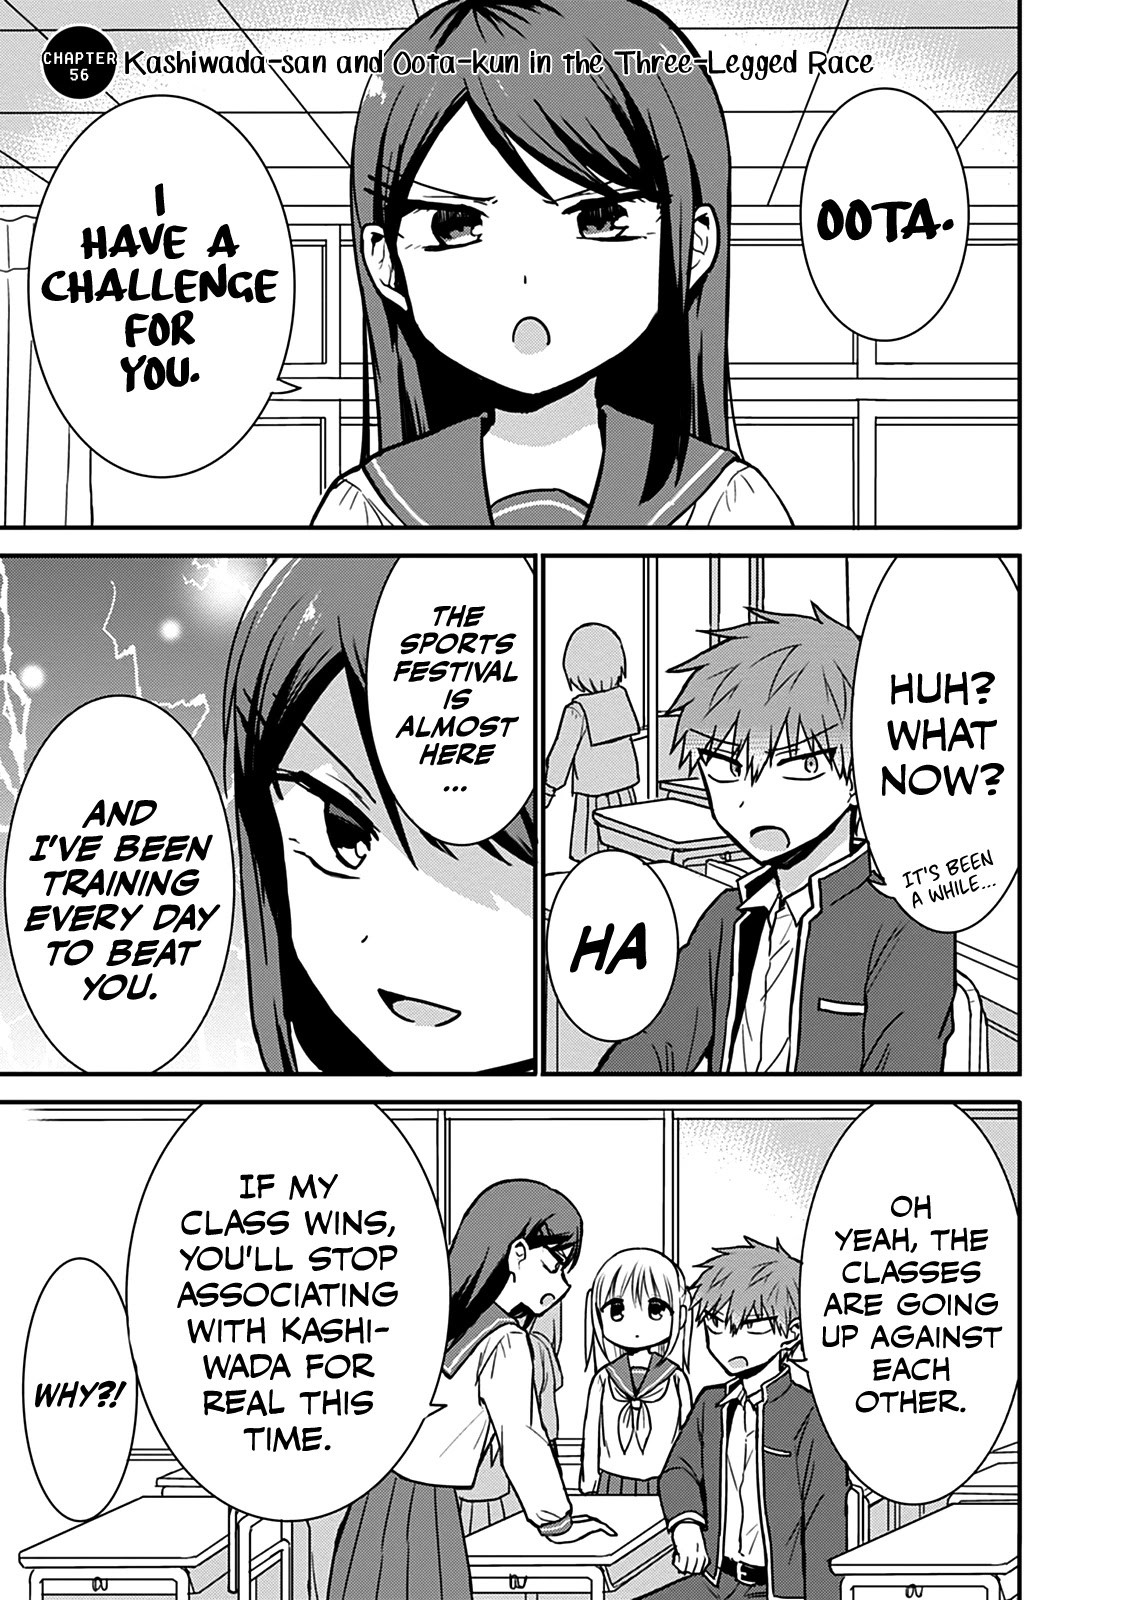 Expressionless Face Girl And Emotional Face Boy - chapter 56 - #1